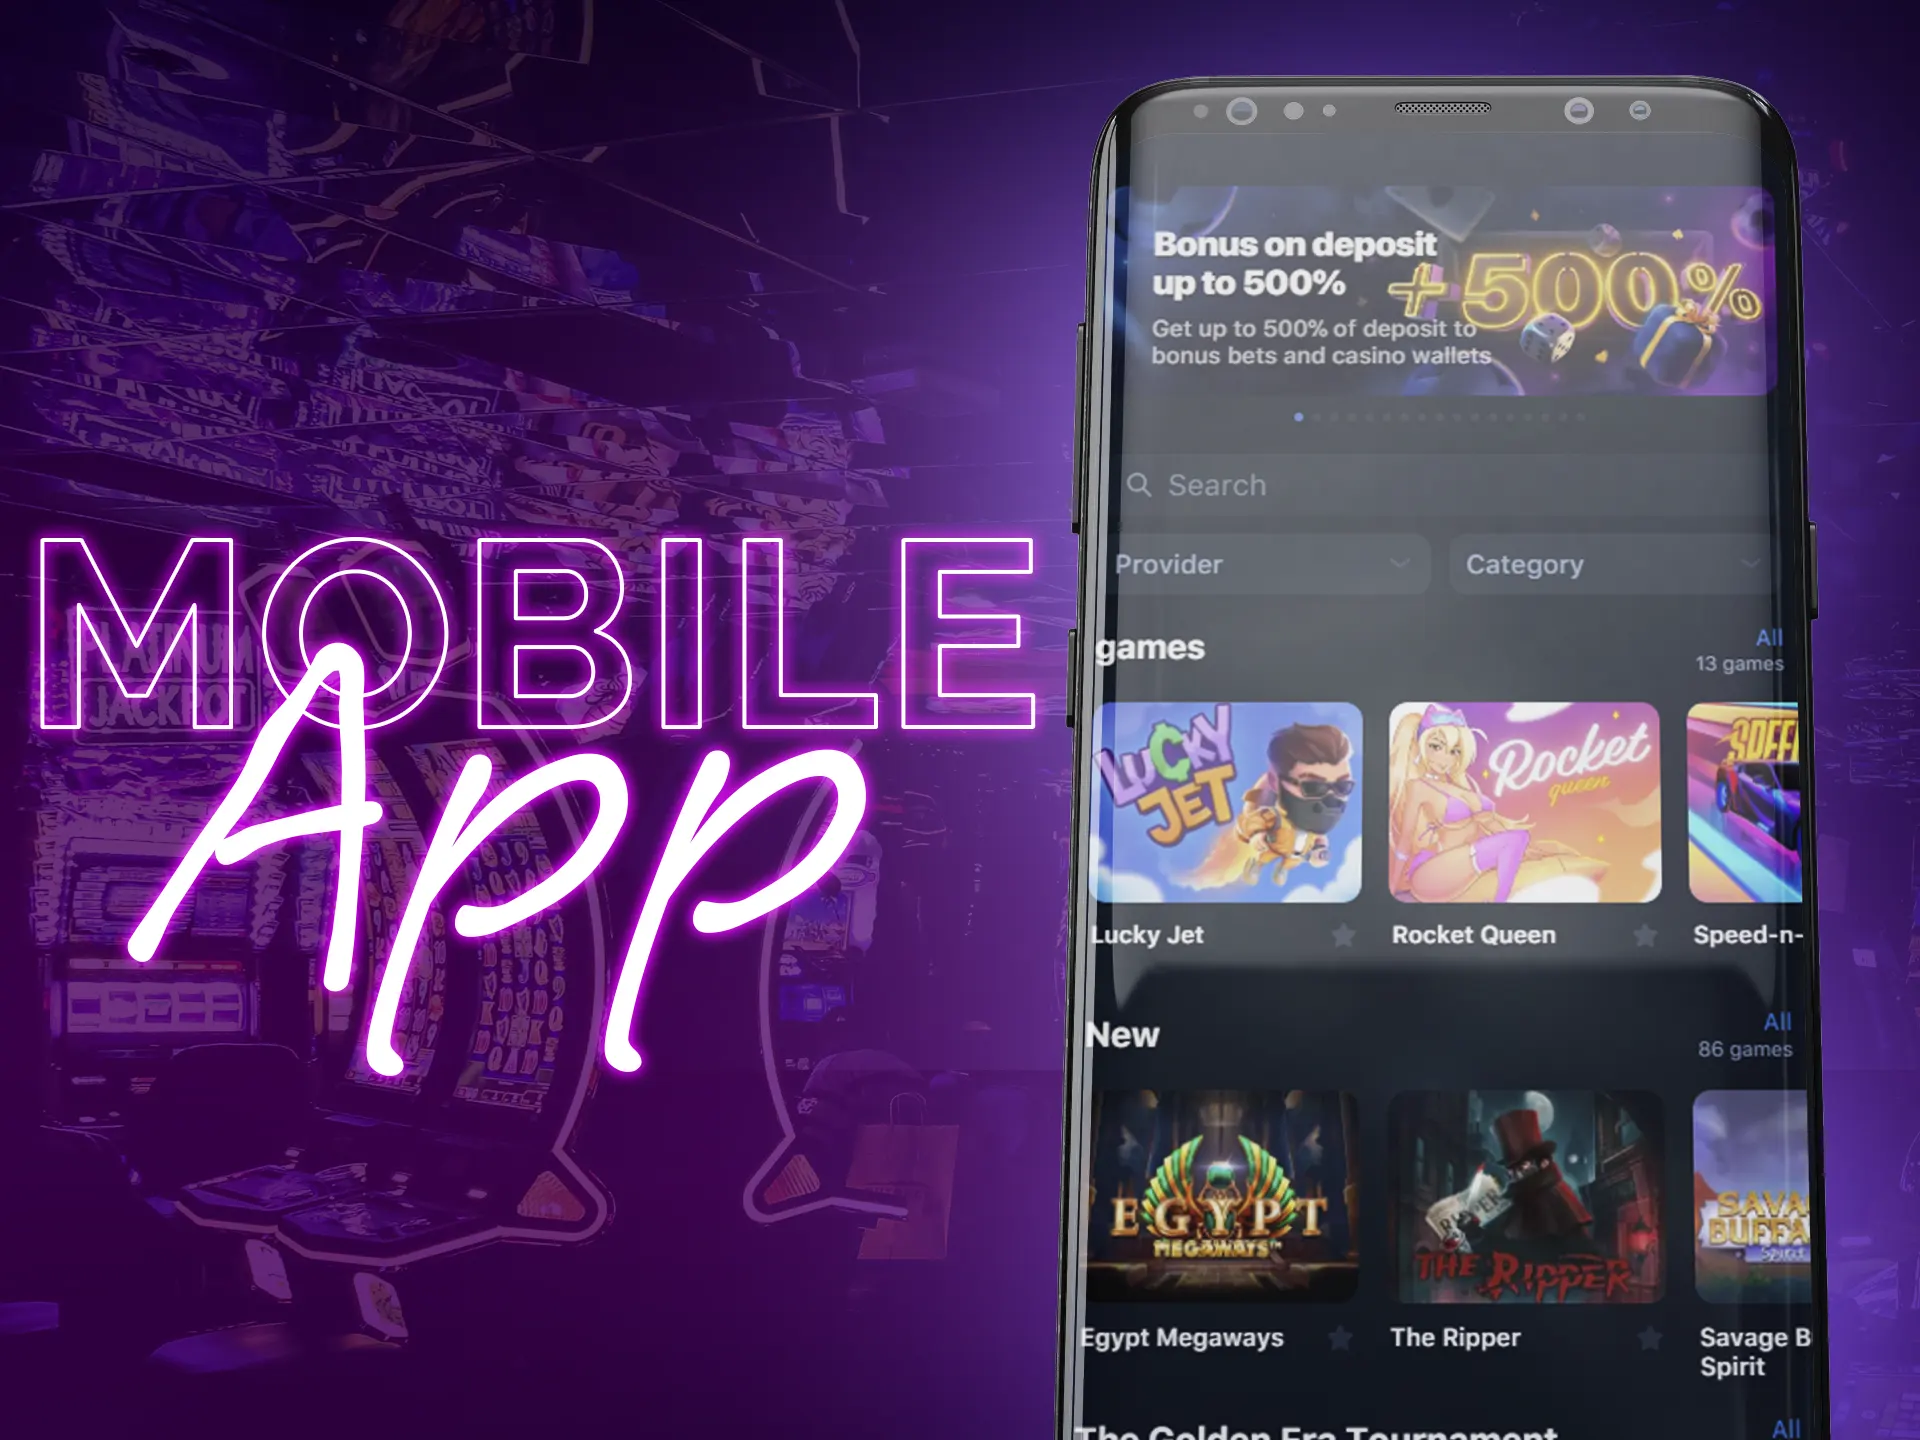 It's important to use a reliable and user-friendly mobile app if you play online slot games using a smartphone.